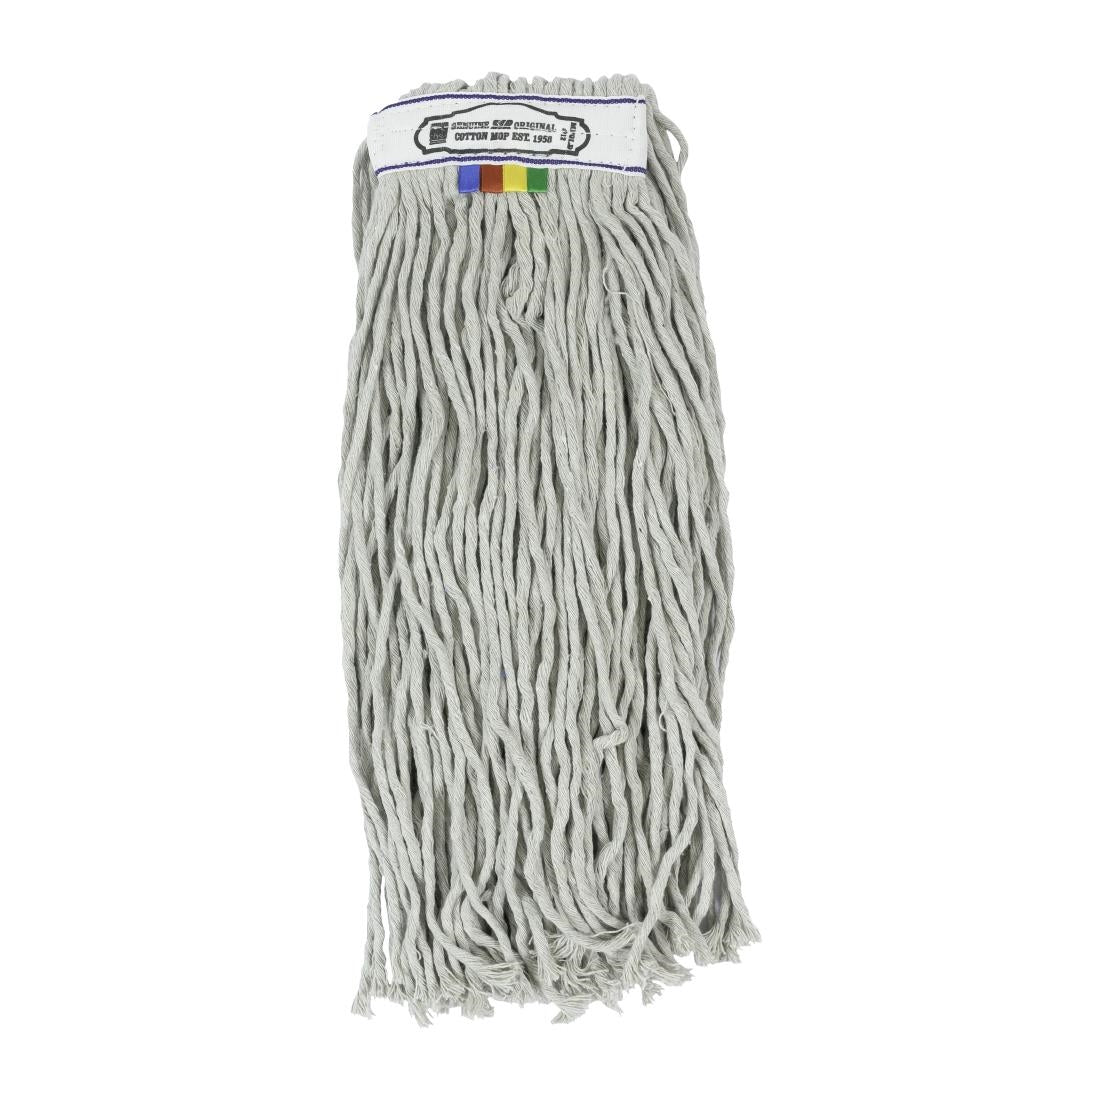 FT391 SYR Traditional Multifold Cotton Kentucky Mop Head 16oz JD Catering Equipment Solutions Ltd